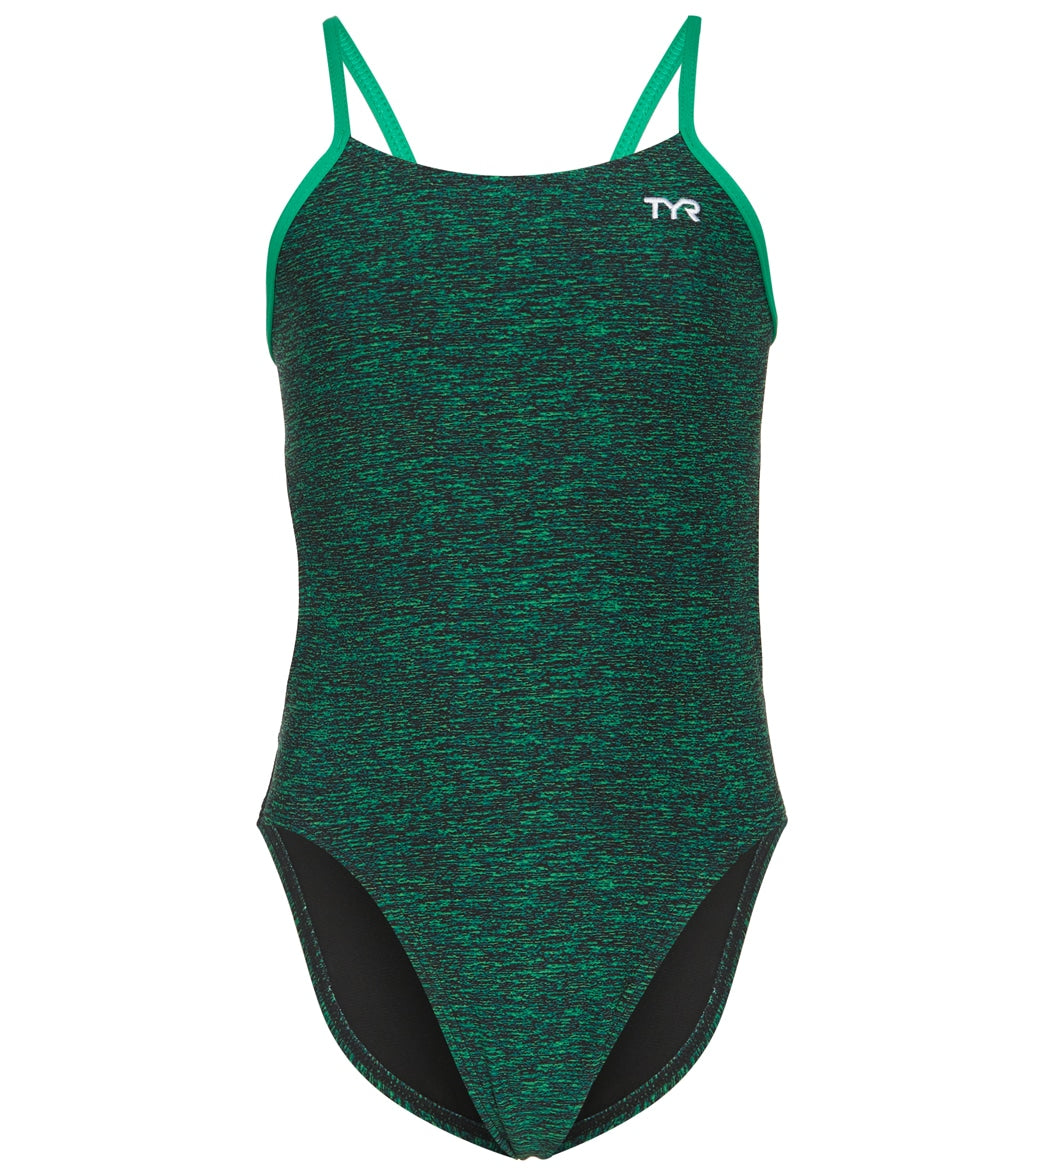 TYR Girls Lapped Cutoutfit One Piece Swimsuit